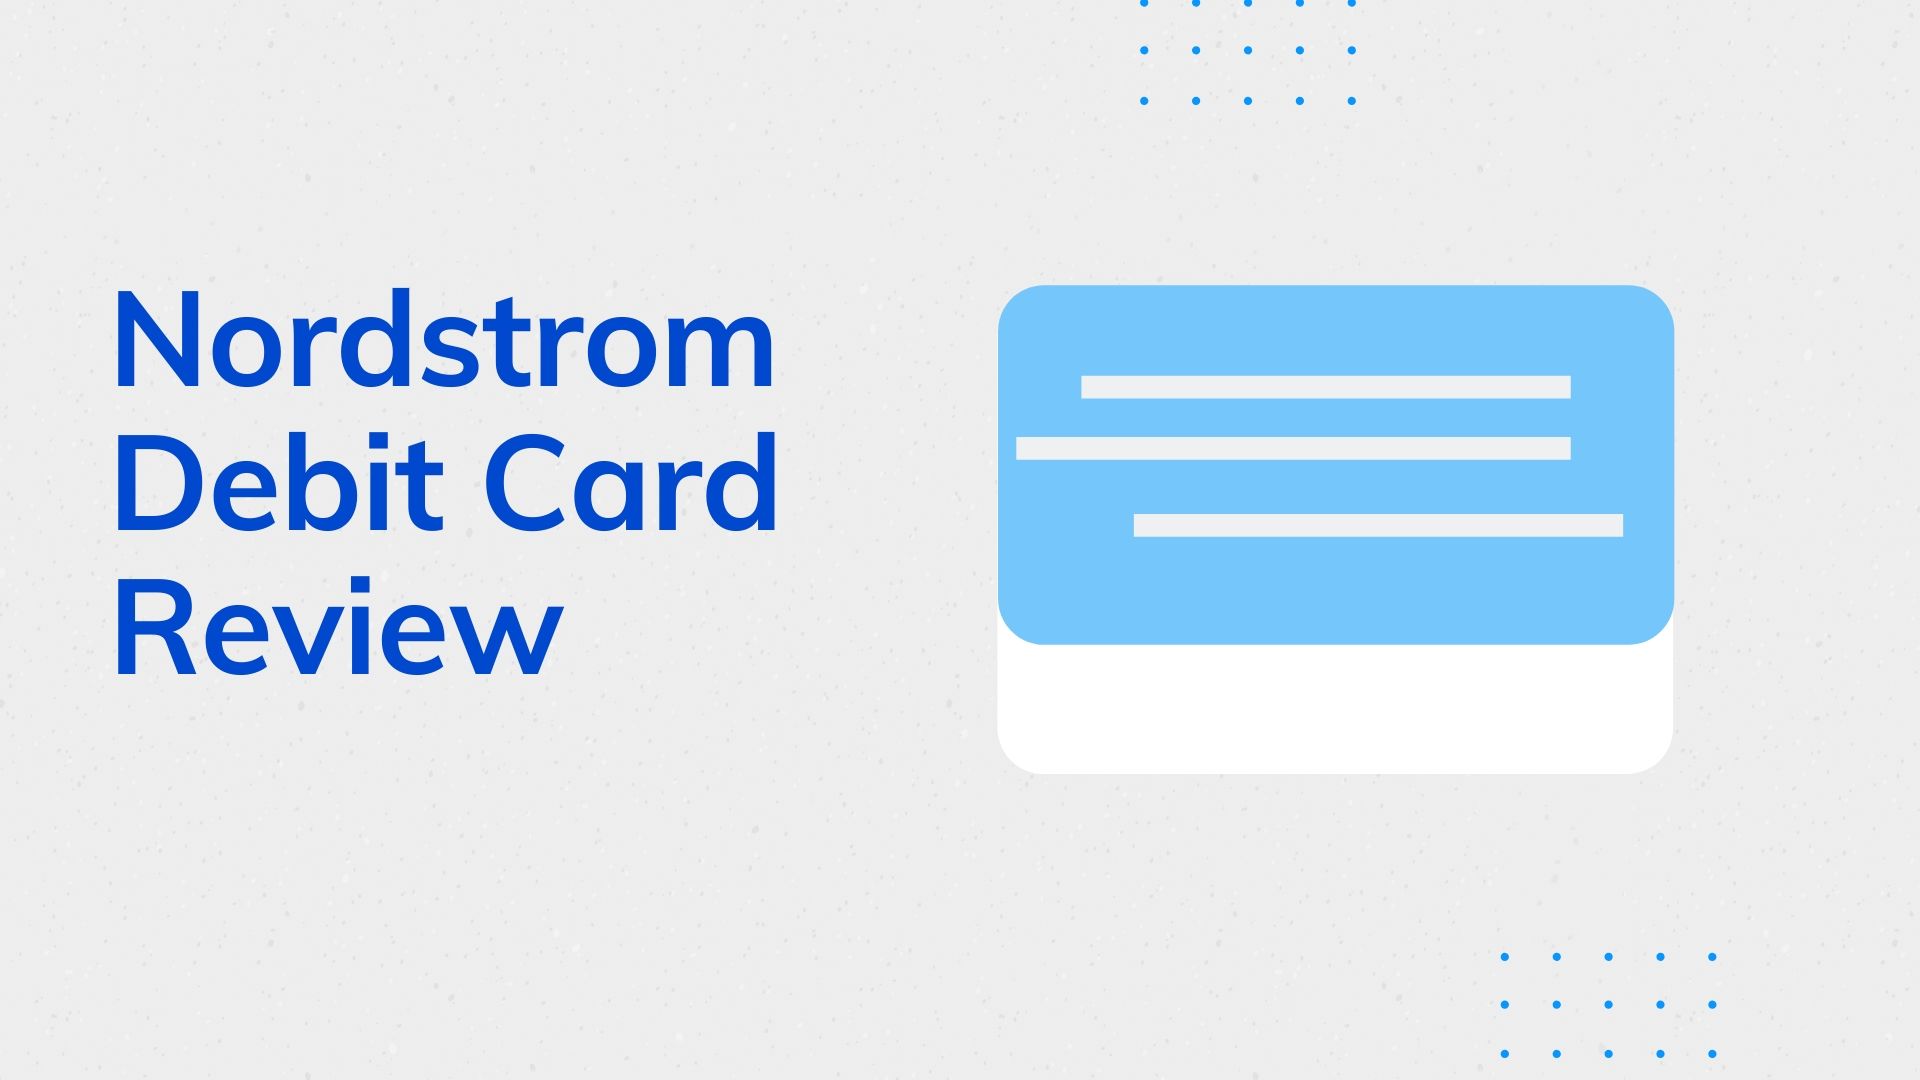 Nordstrom Debit Card Review (Latest 2020)